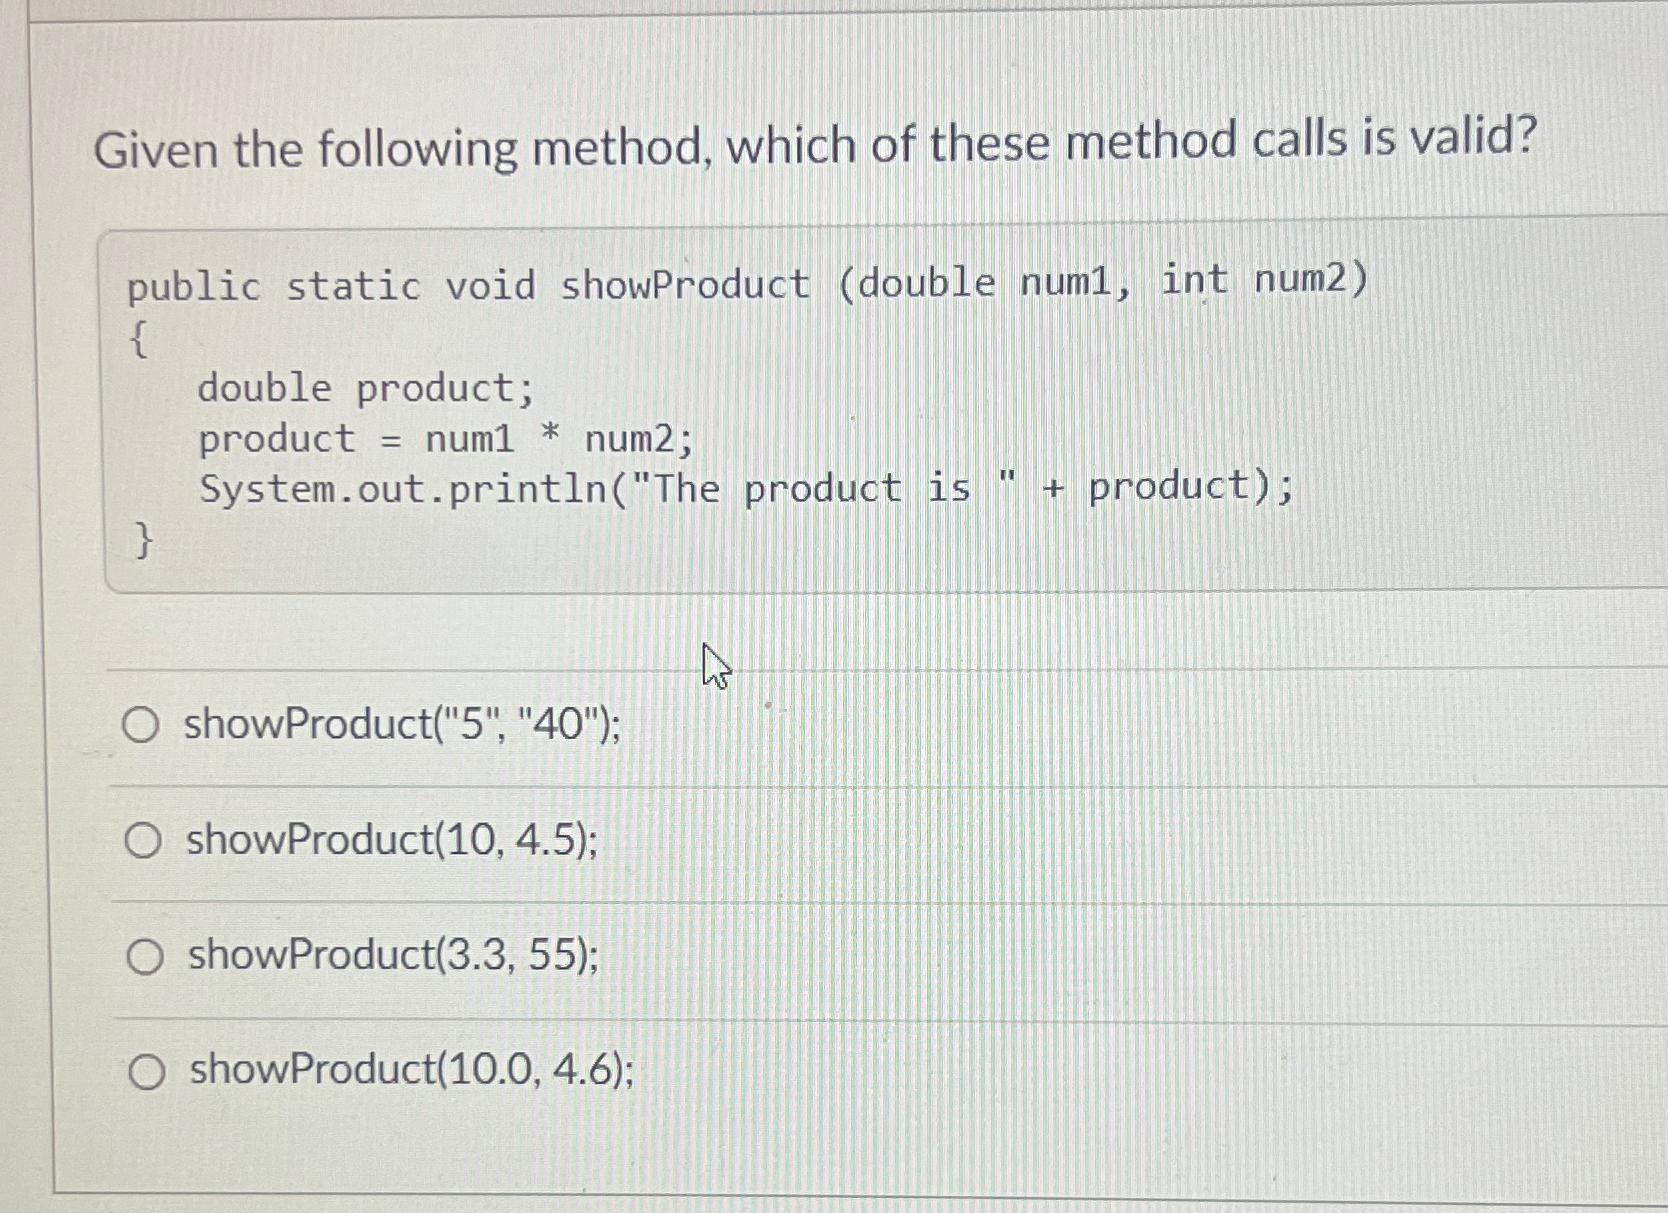 Given the following method, which of these method calls is valid? public static void showProduct (double